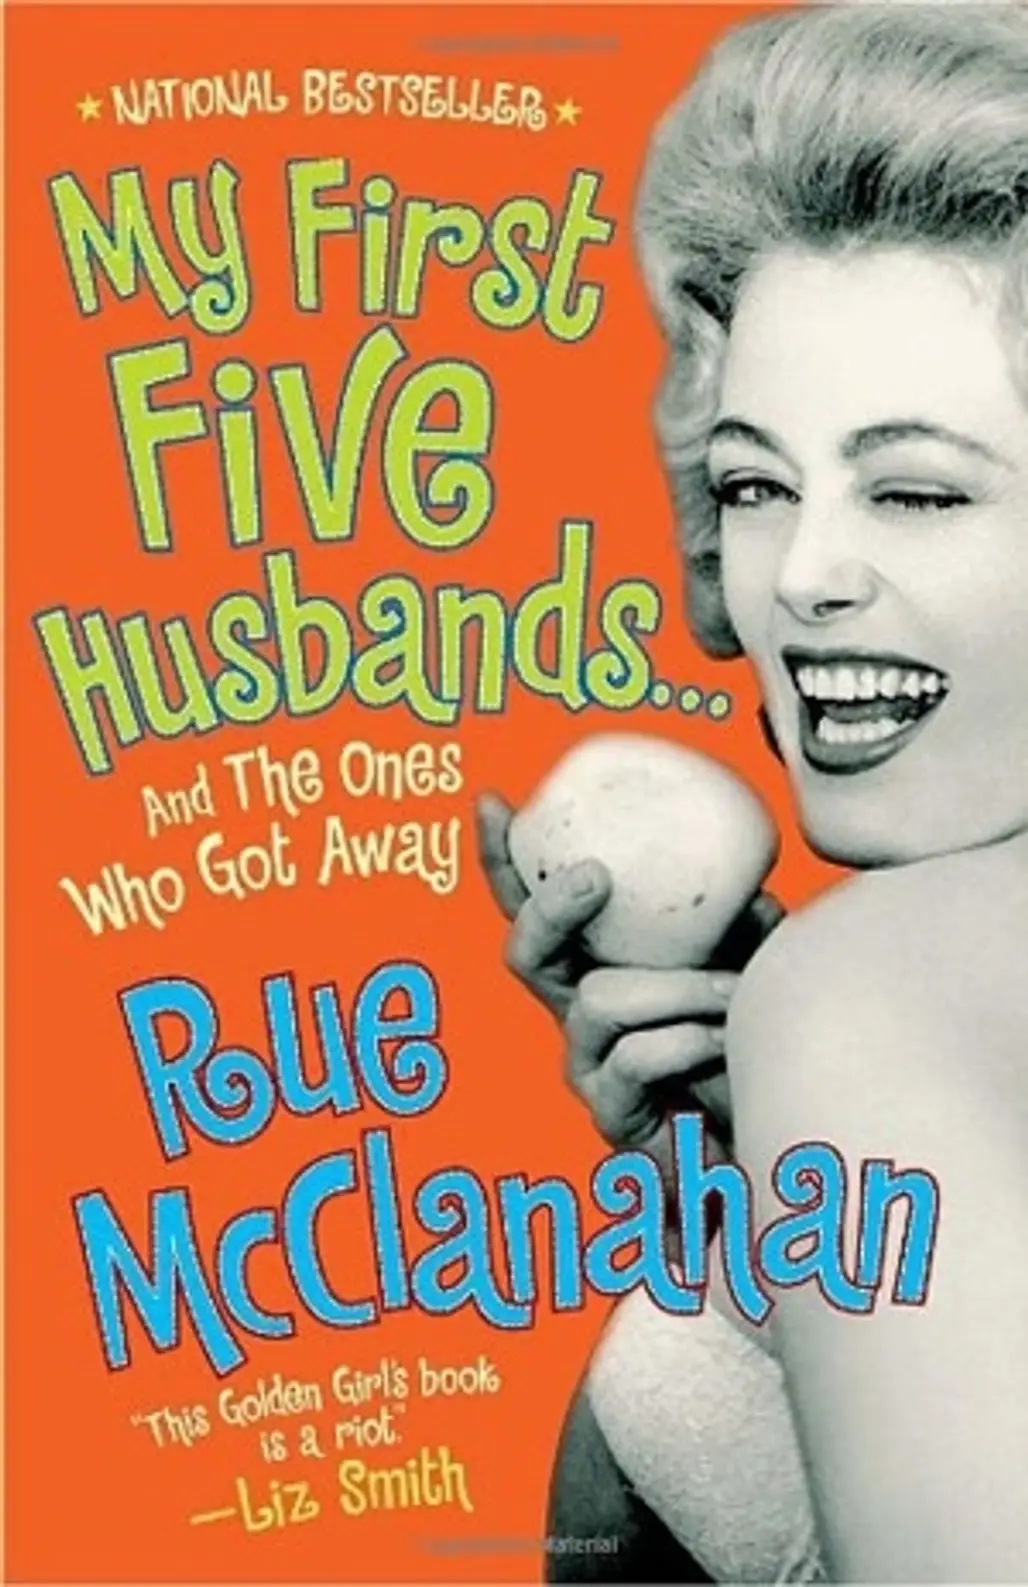 My First Five Husbands...and the Ones Who Got Away, by Rue McClanahan